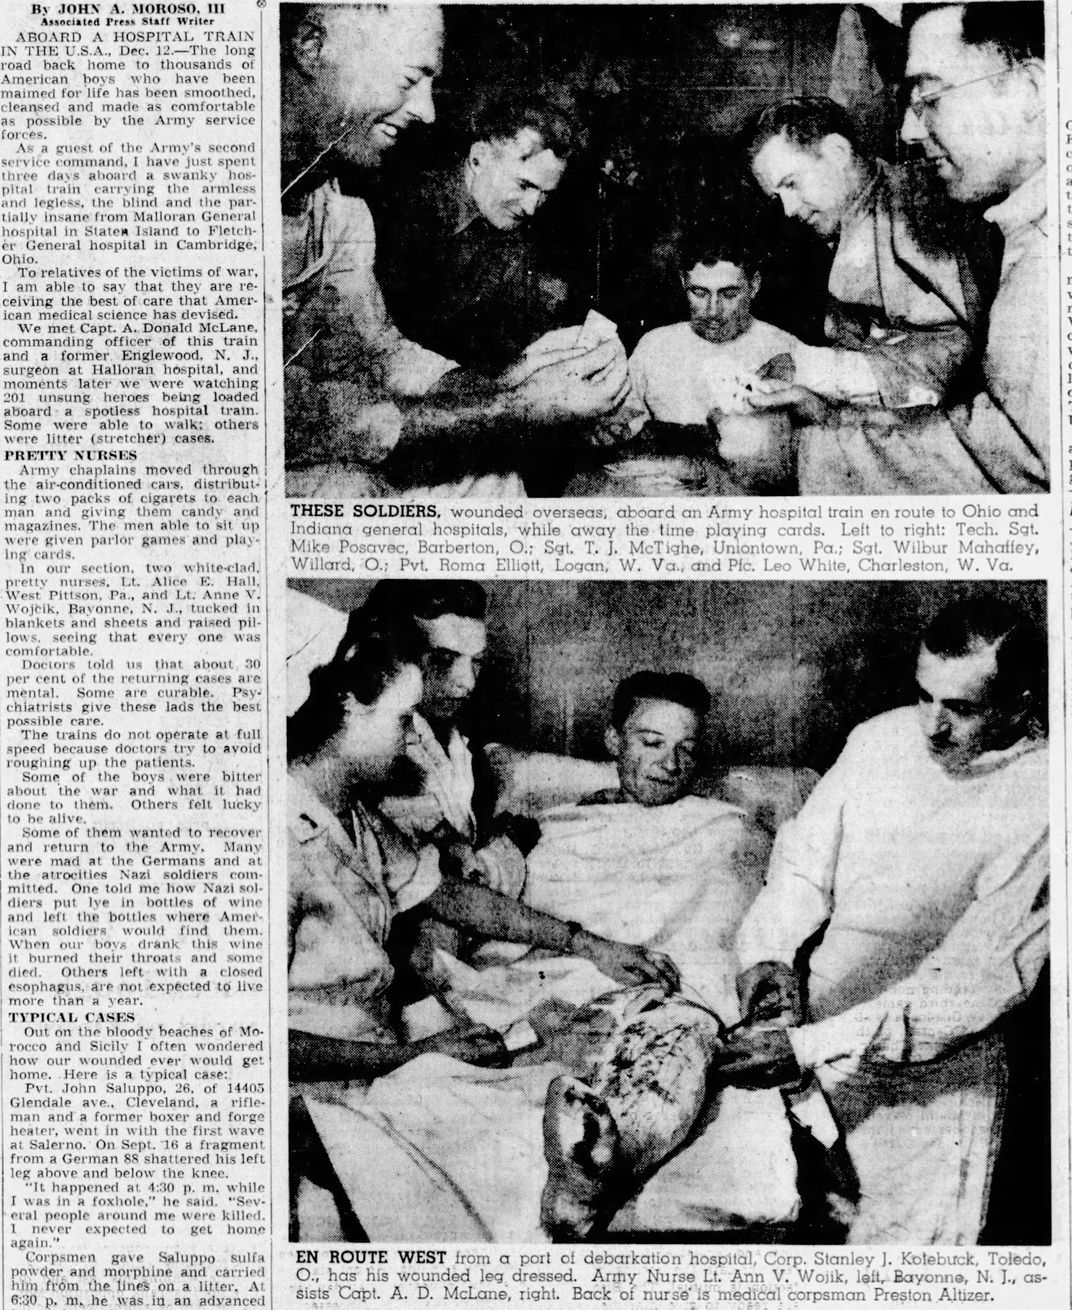 A December 1943 Associated Press article about Army hospital trains